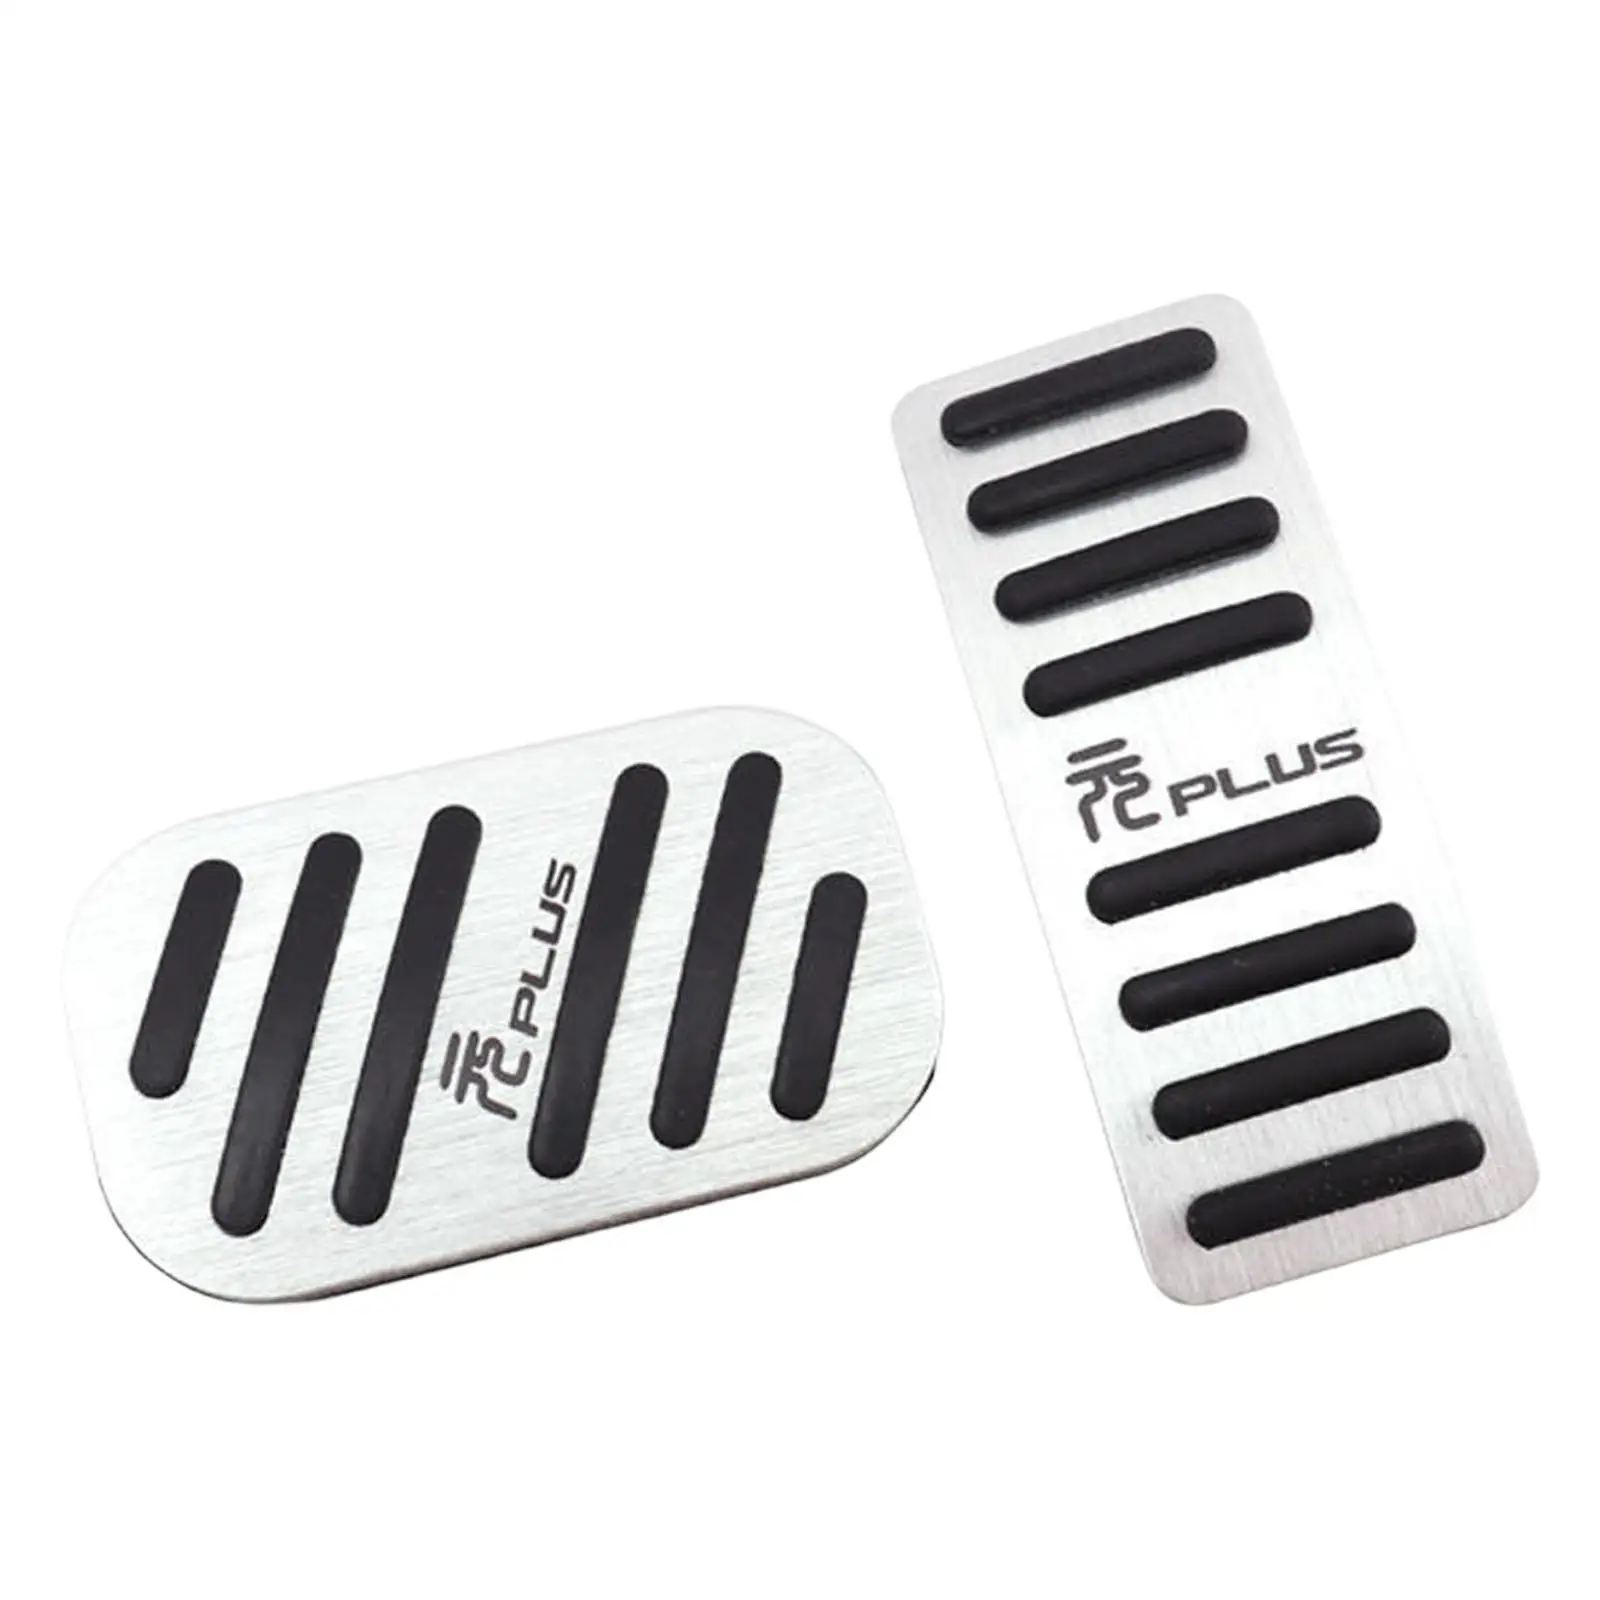 Gas Brake Pedal Cover Set Anti Slip for Byd Atto 3 Yuan Plus Durable